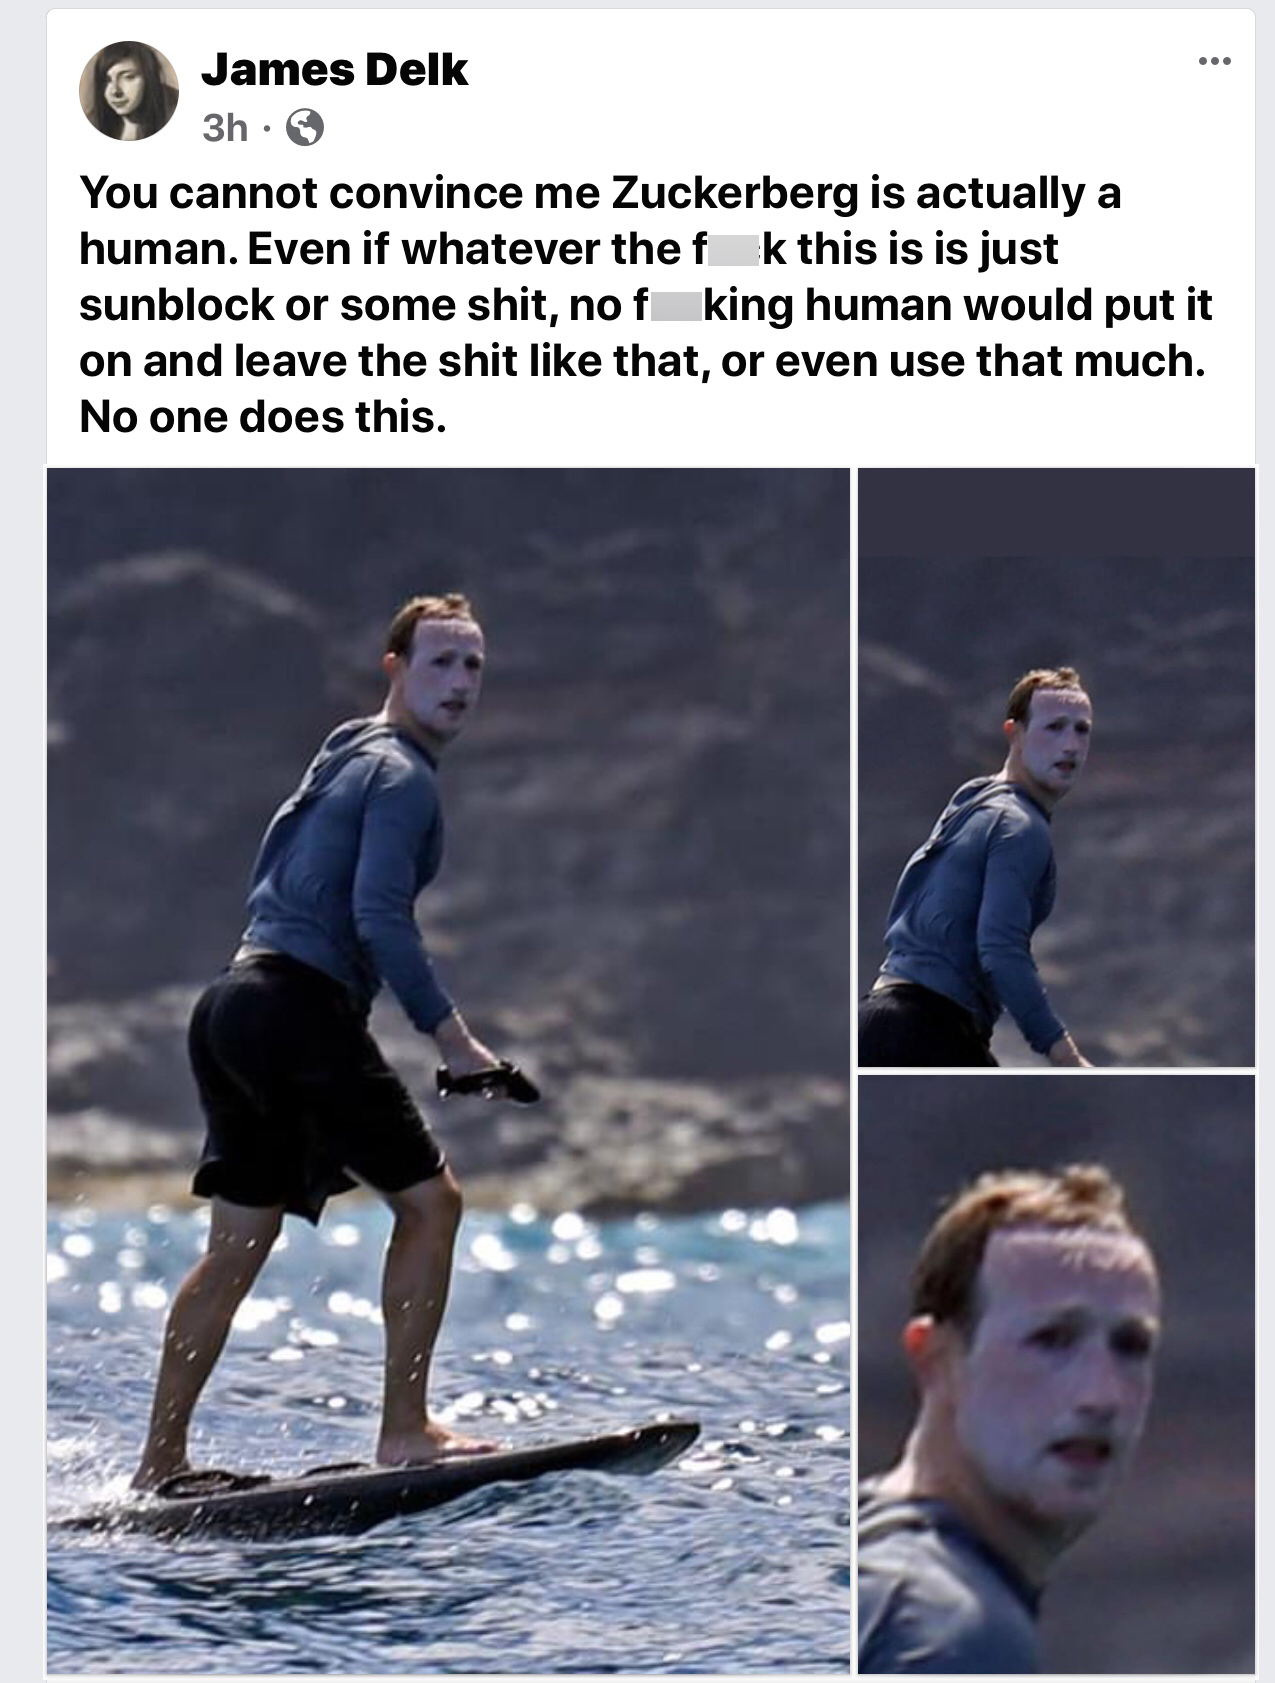 water - James Delk 3h. You cannot convince me Zuckerberg is actually a human. Even if whatever the f k this is is just sunblock or some shit, nof king human would put it on and leave the shit that, or even use that much. No one does this.